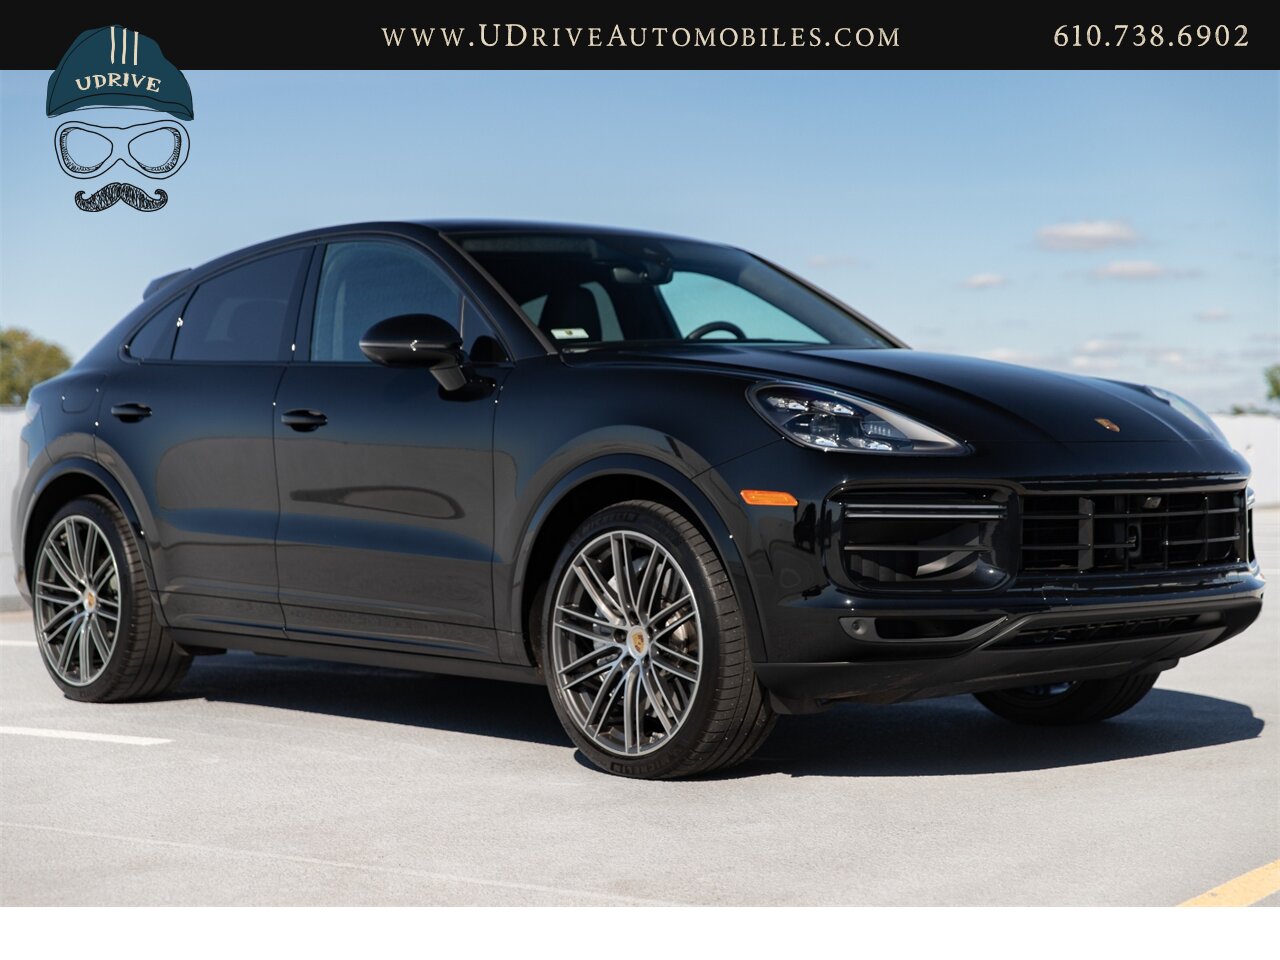 2020 Porsche Cayenne Turbo Coupe 2+1 Rear Comf Seats Prem Plus  22in Turbo Design Whls Sport Exhst Adap Cruise Surround View - Photo 14 - West Chester, PA 19382